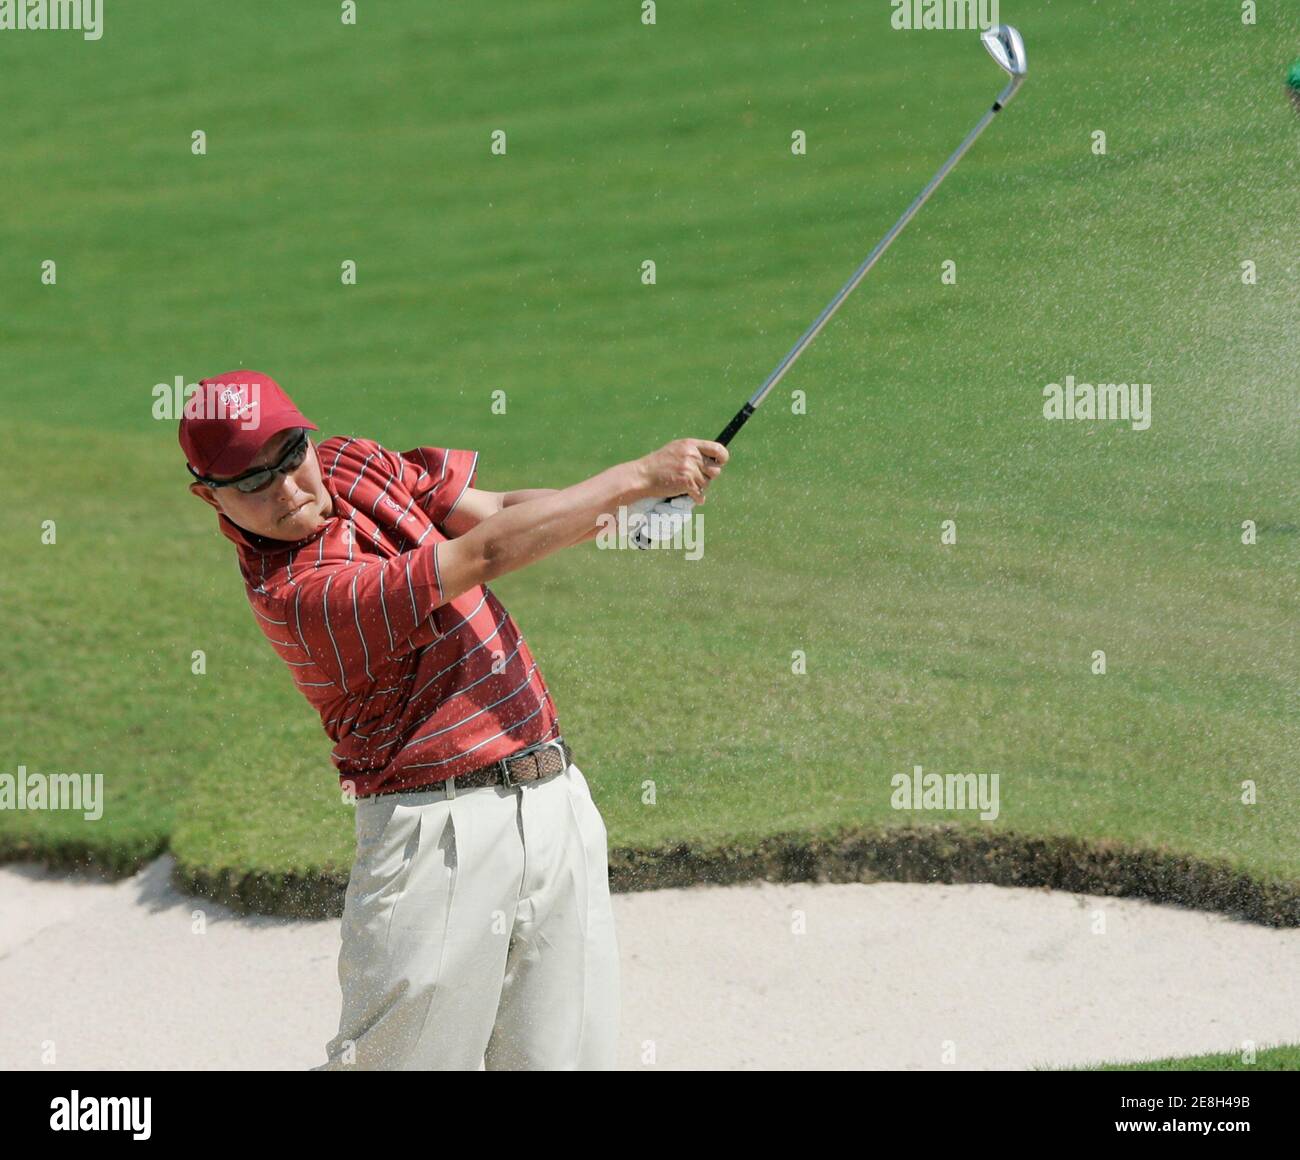 Toru Taniguchi of Japan hits a shot out of the bunker on the 2nd hole during the inaugural Royal Trophy golf Championship at Amata Spring Country Club on the outskirts of Bangkok January 12, 2007.   REUTERS/Chaiwat Subprasom (THAILAND) Stock Photo